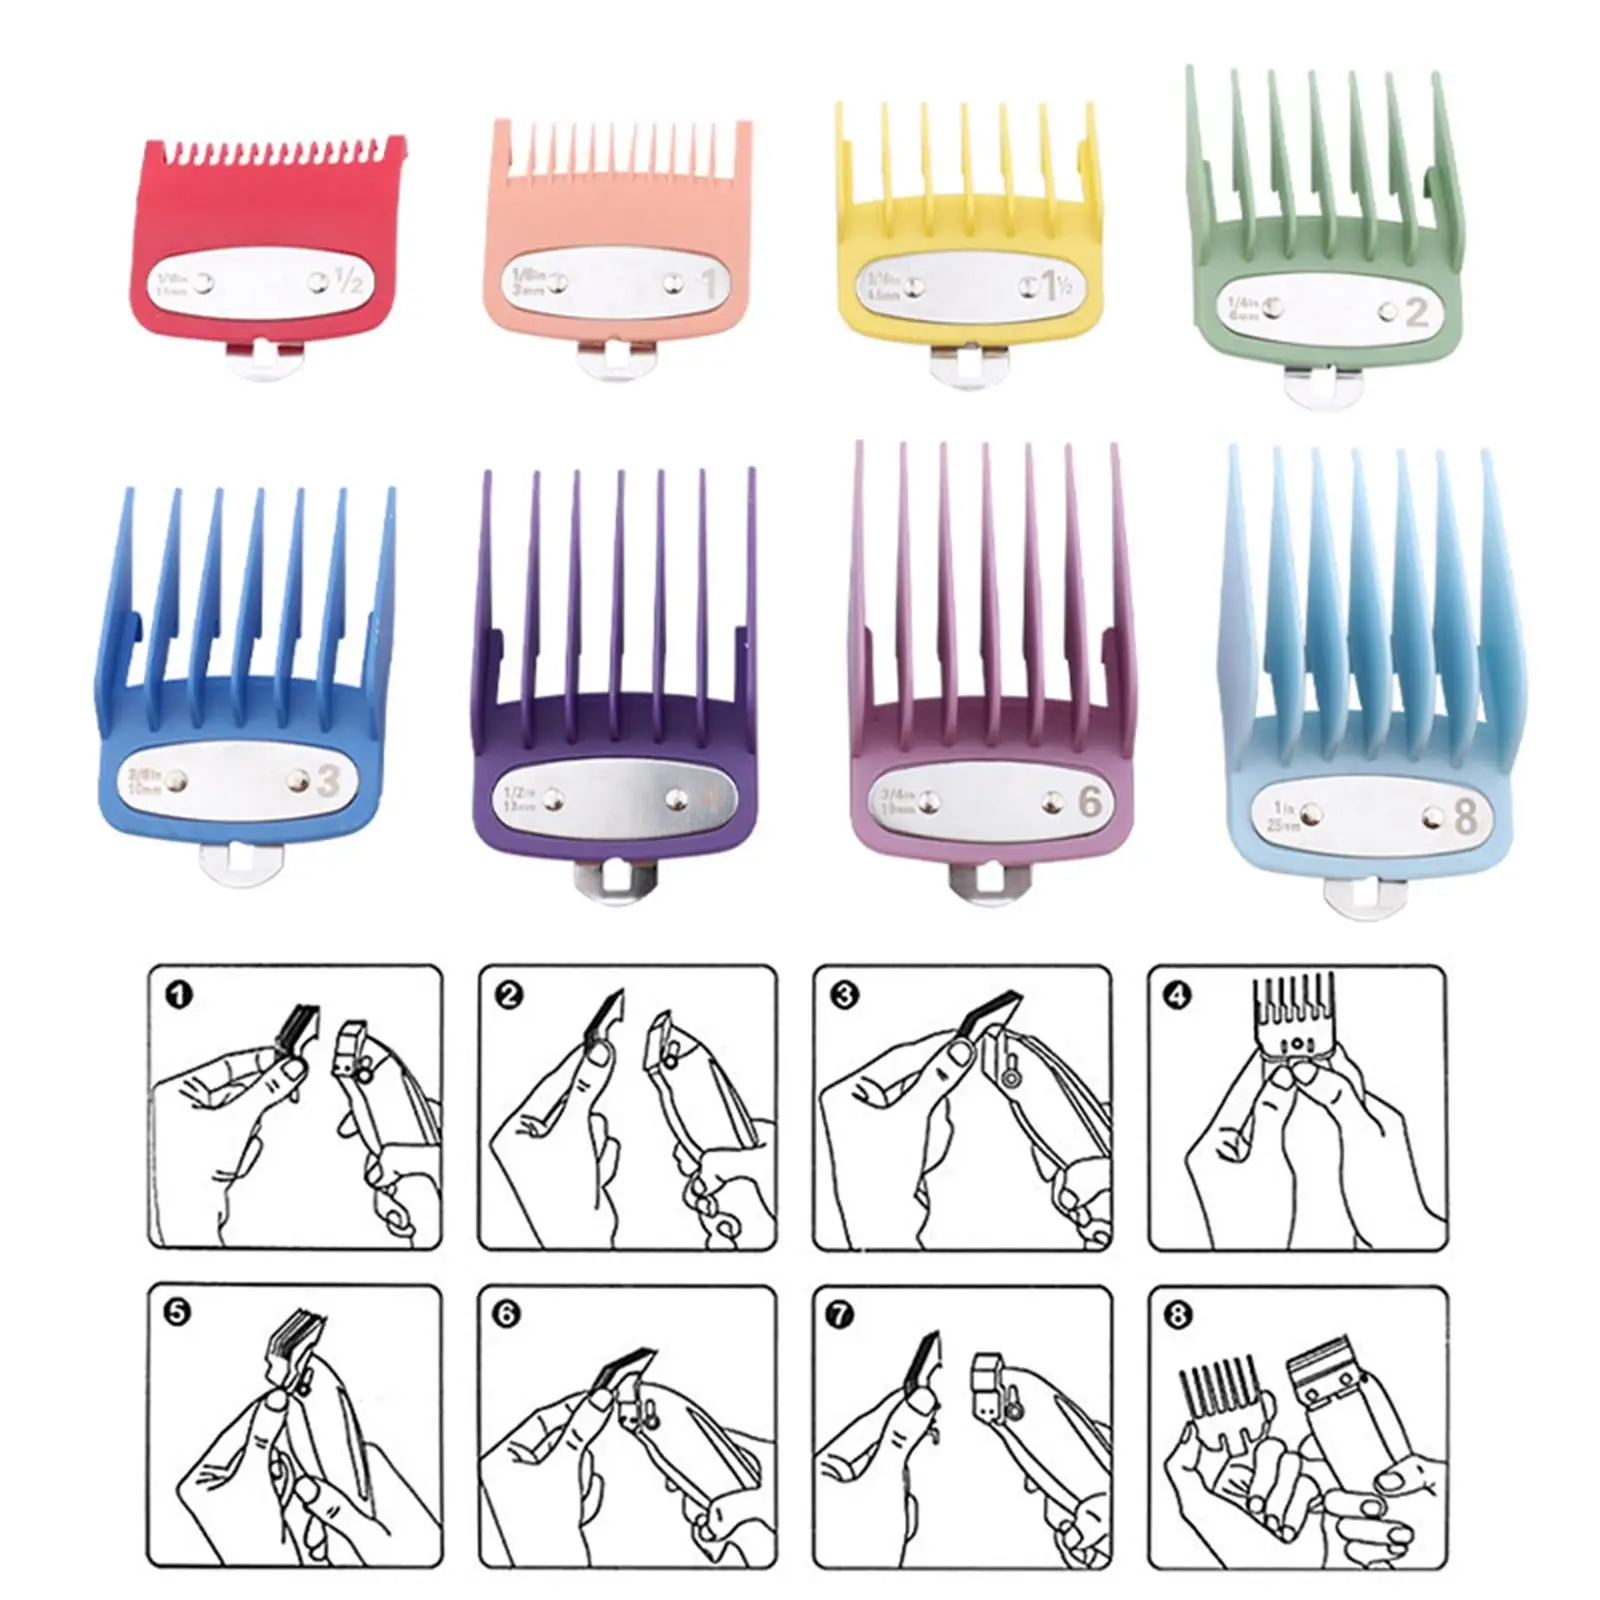 8 Pieces Hair Clipper Guards from 1/16 inch to 1inch for Wahl Clippers